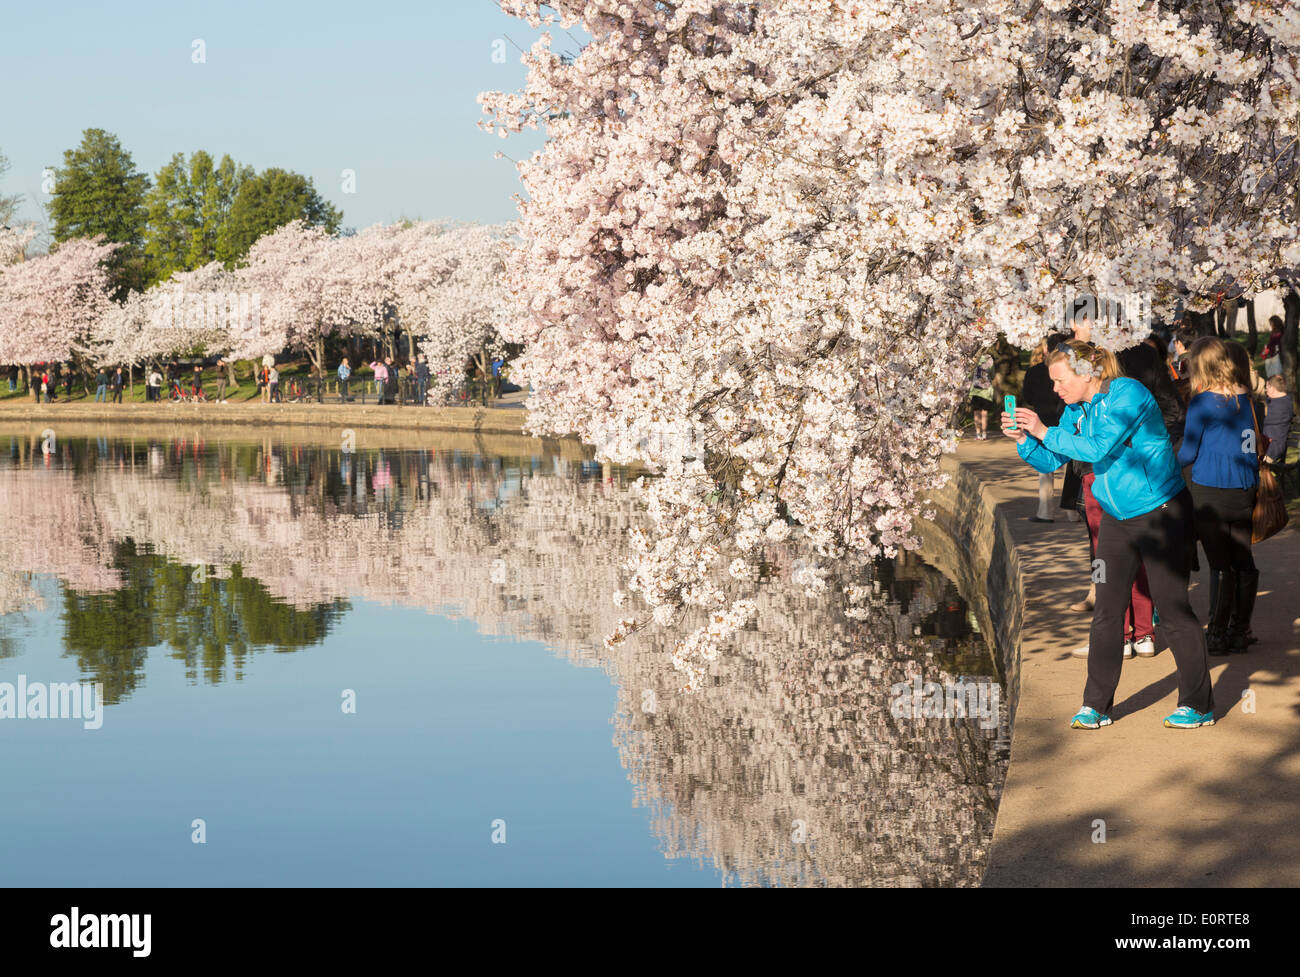 Washington DC, USA in Spring - Tidal Basin during the National Cherry Blossom Festival as tourists take photos in spring season Stock Photo